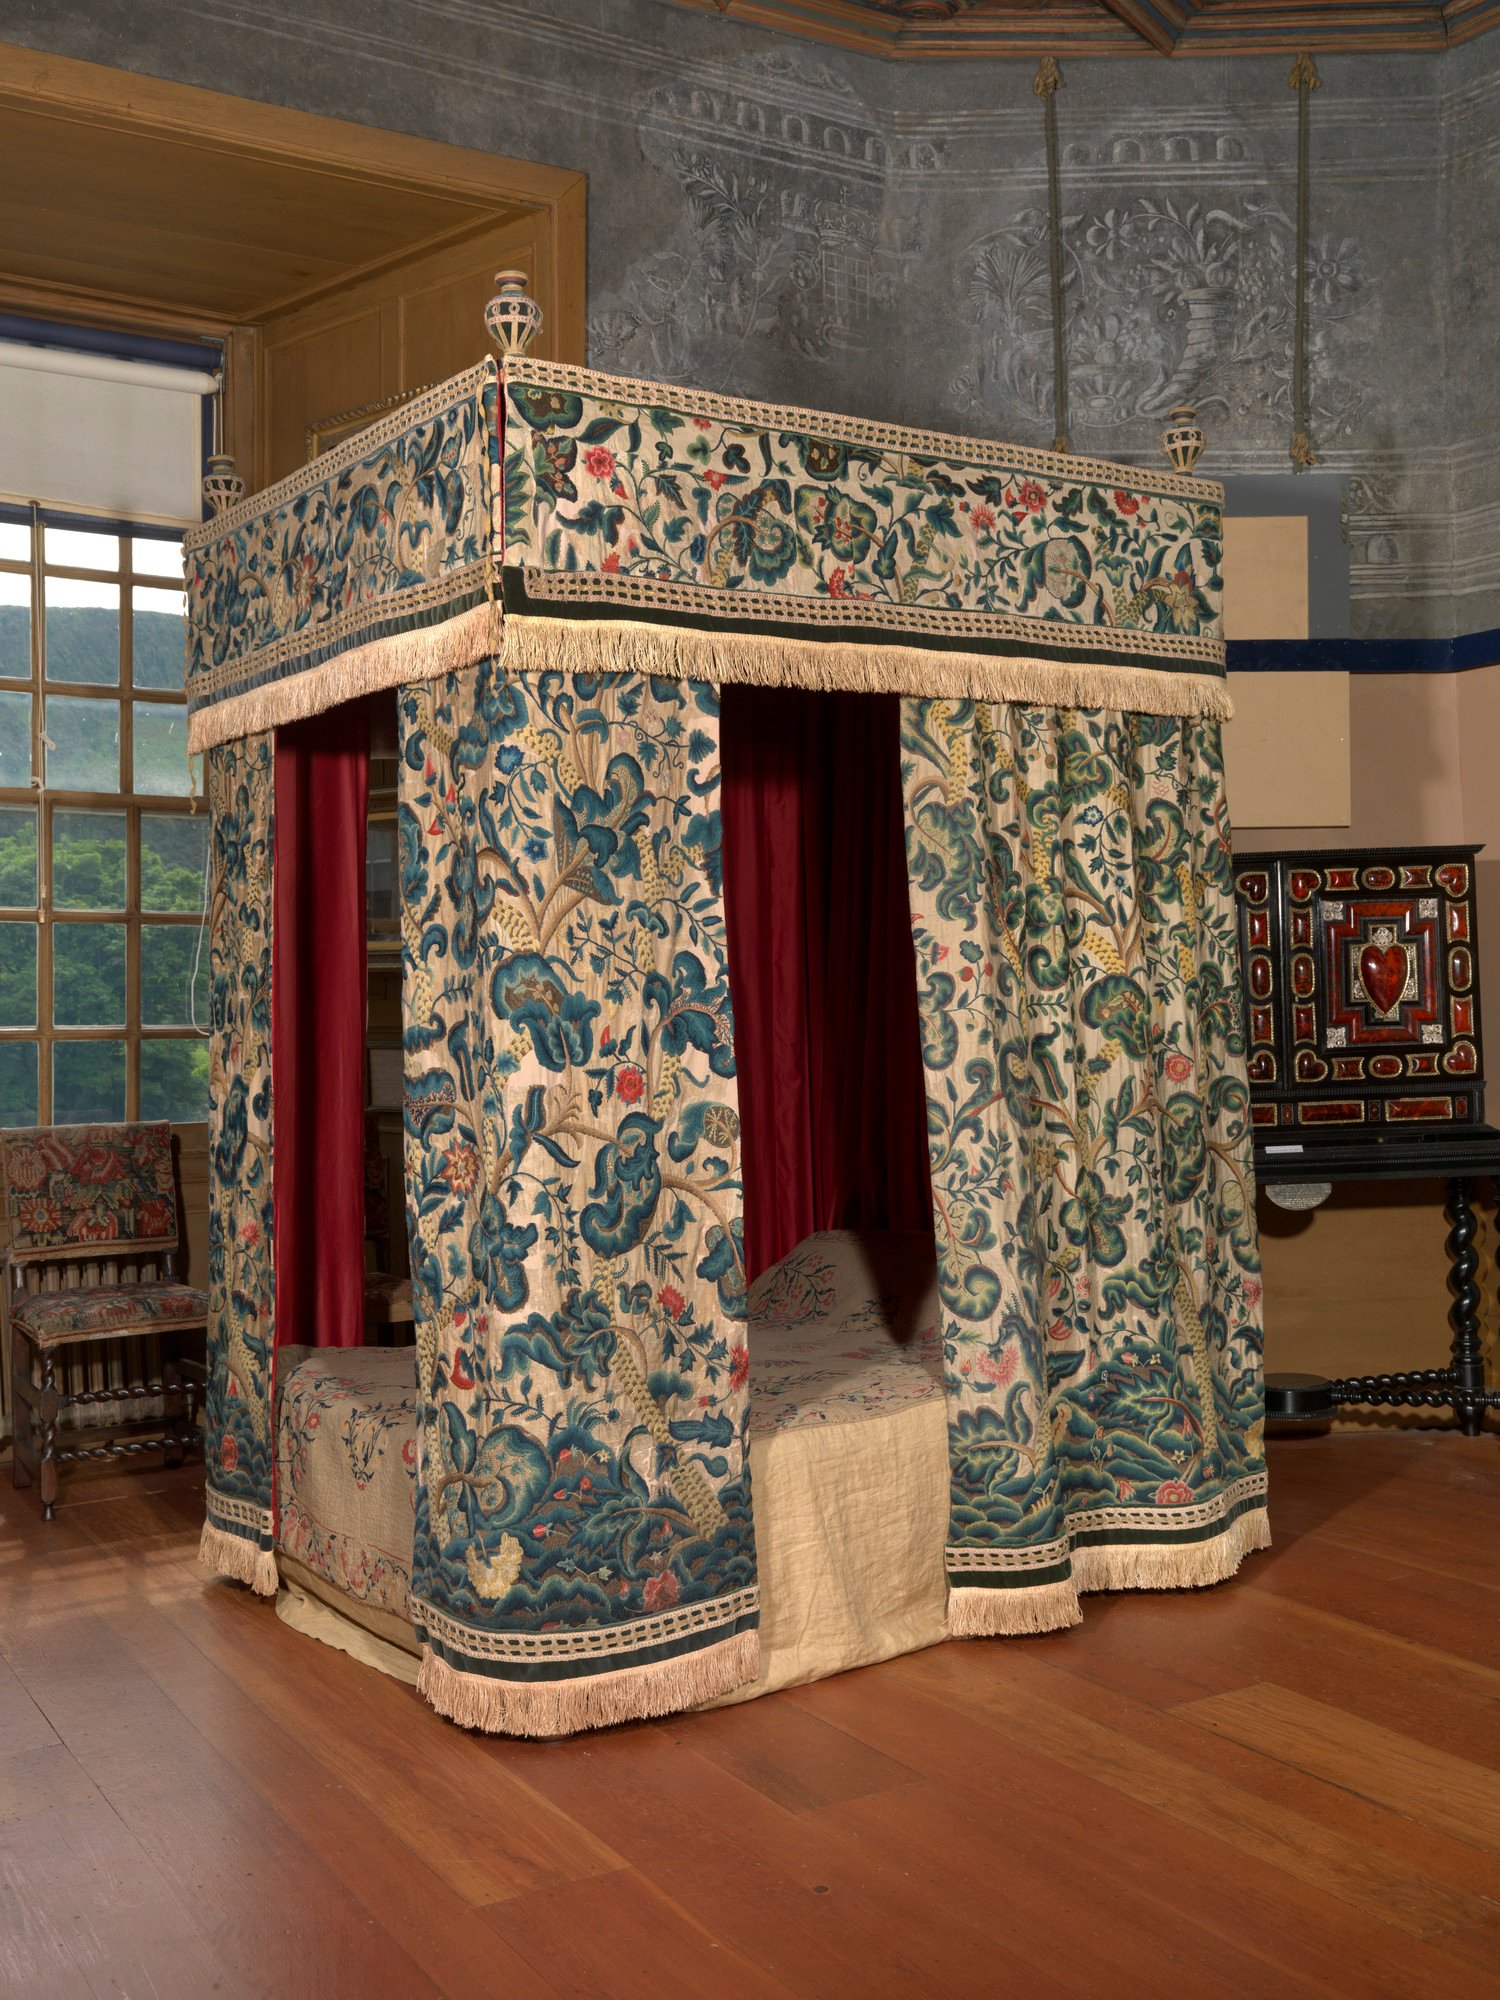 The four-poster bed in Mary, Queen of Scots' Bedchamber with old bedhangings